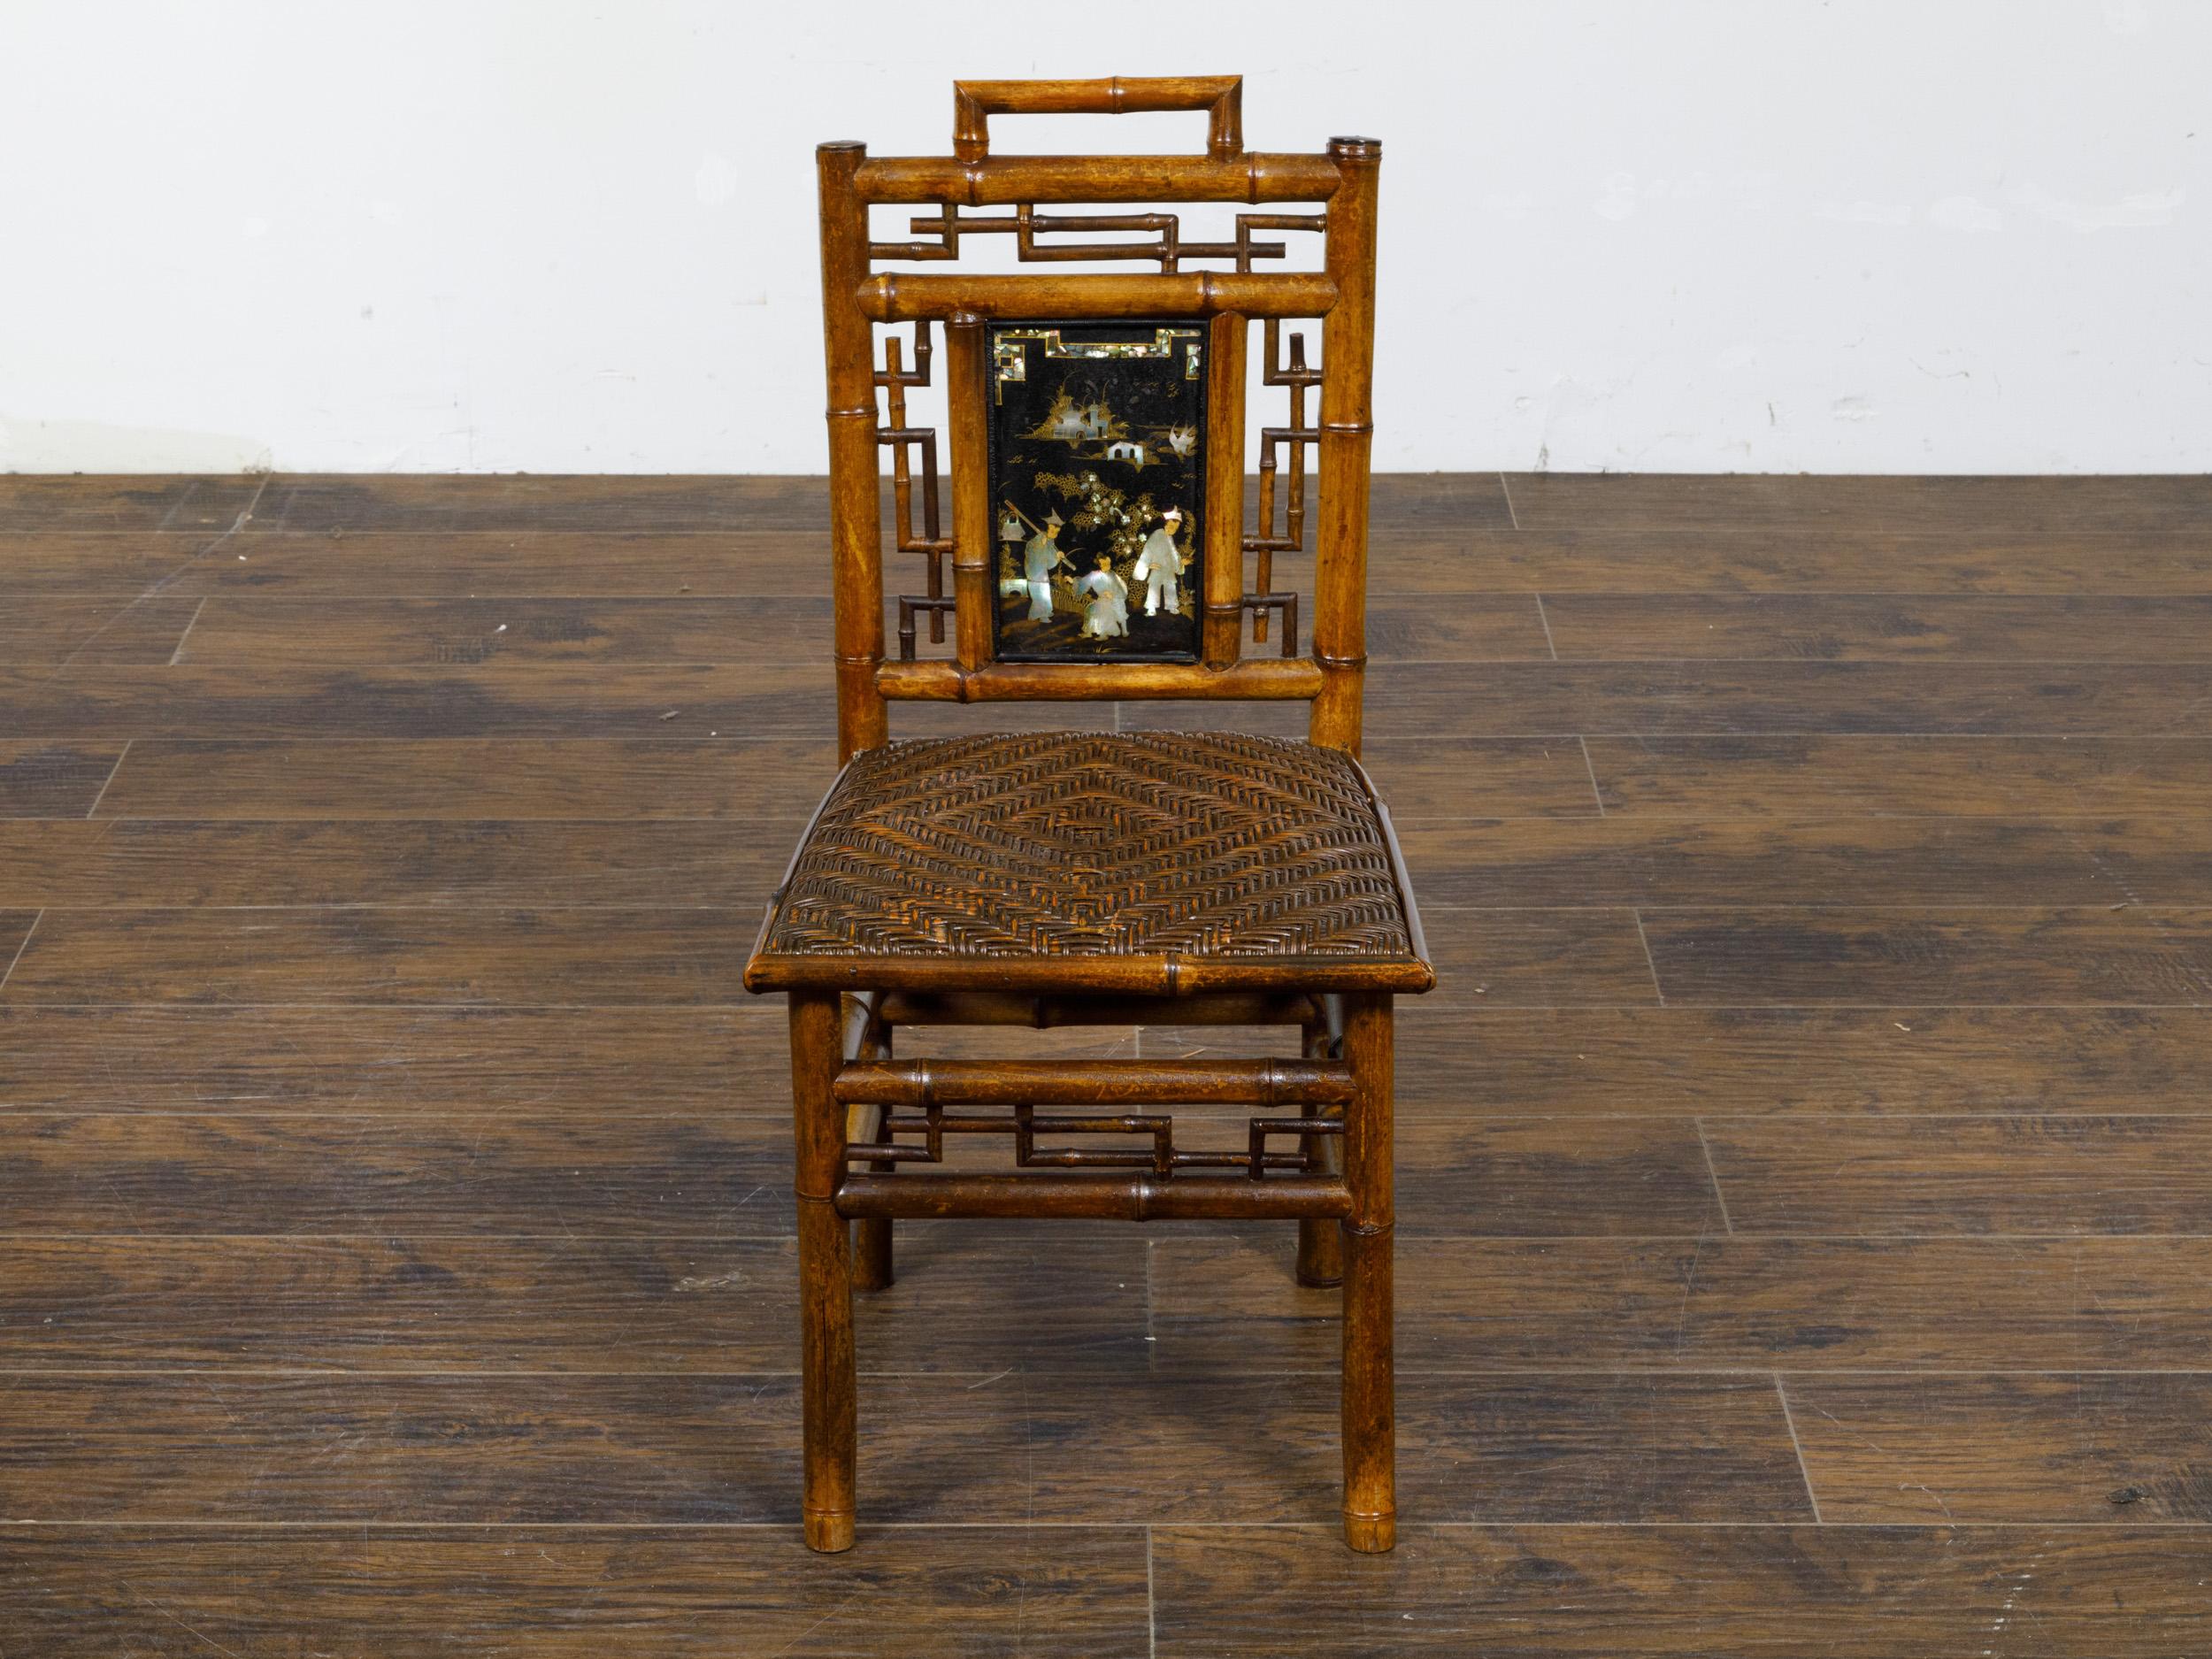 A small signed Perret et Vibert Chinoiserie bamboo chair from the late 19th century with mother of pearl inlaid black lacquered plaque on the back splat and rattan seat. Discover the exquisite craftsmanship and historical allure of this charming